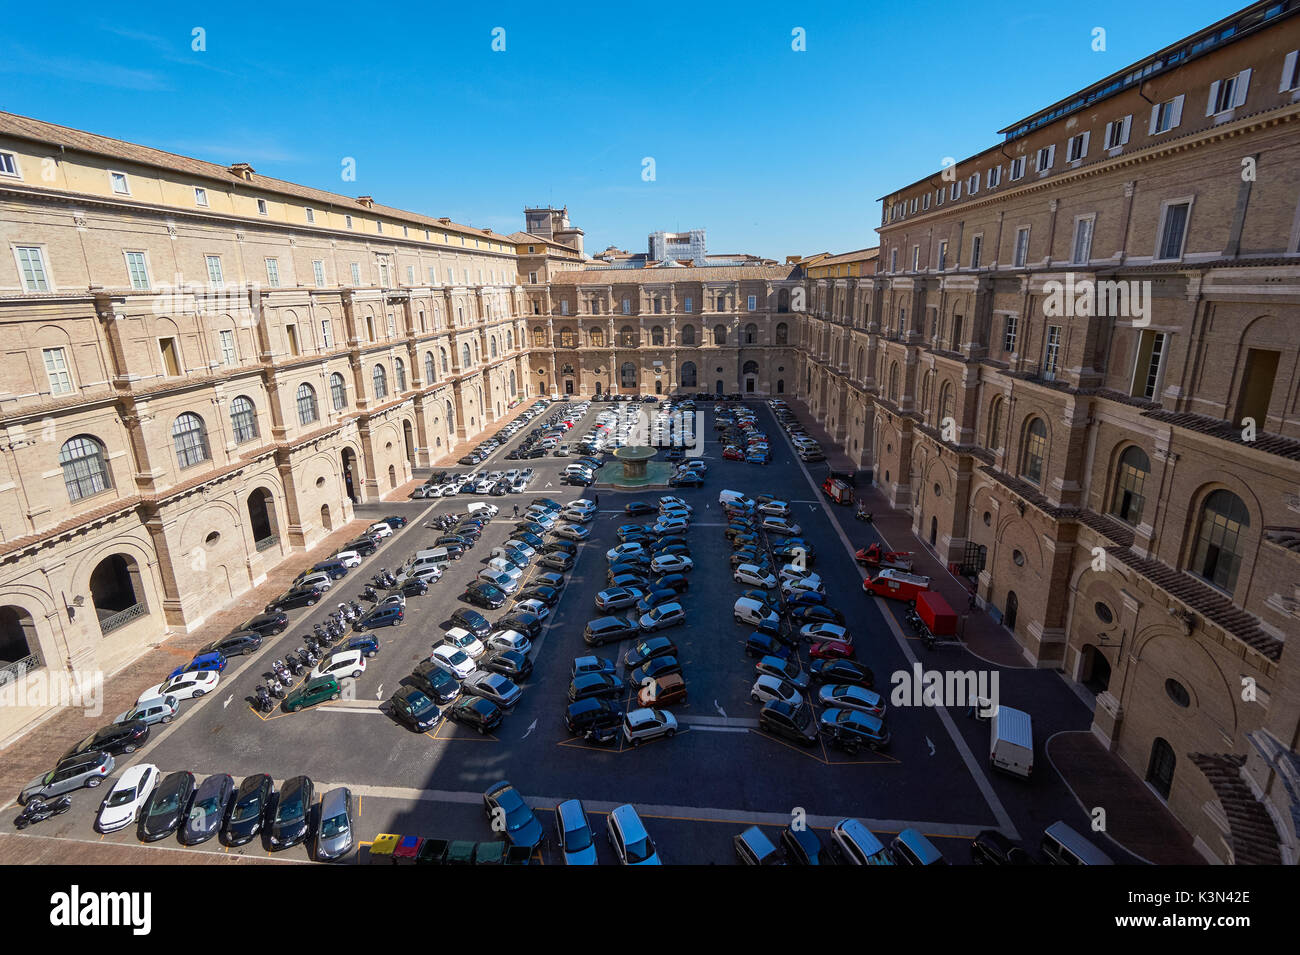 Car parking in the Belvedere Courtyard of the Vatican City, Rome, Italy Stock Photo